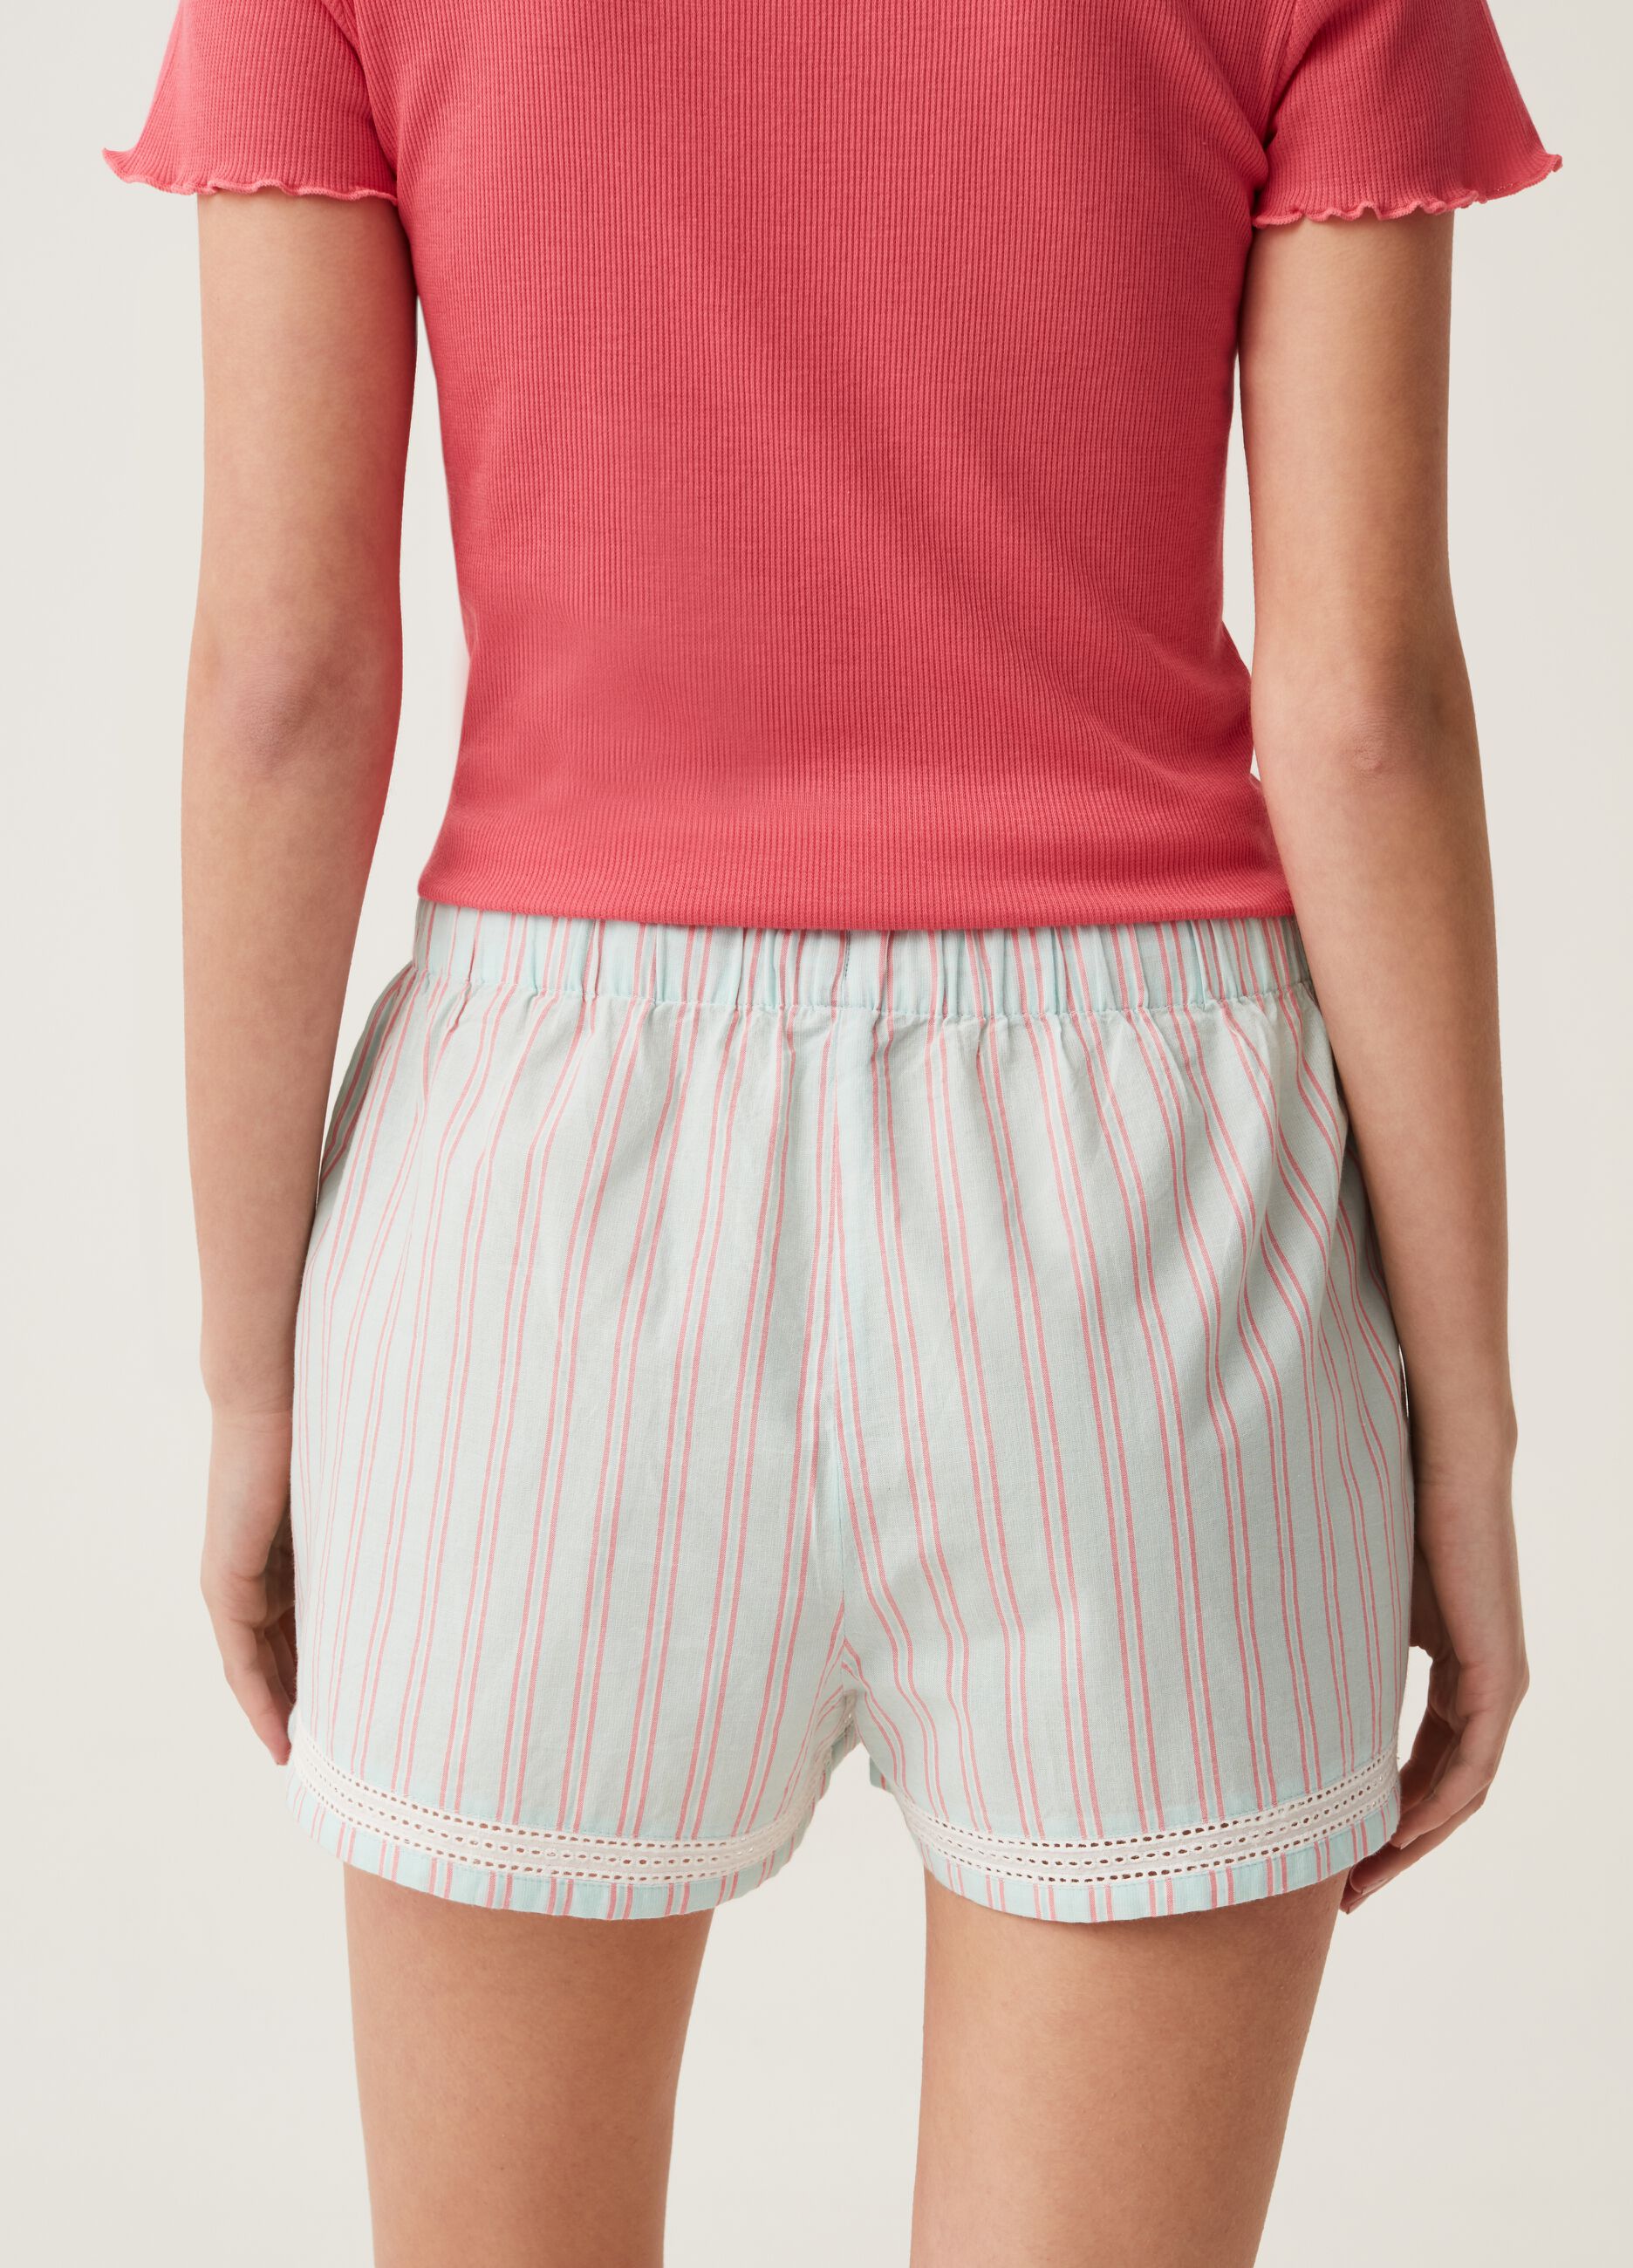 Shorts pigiama a righe con coulisse